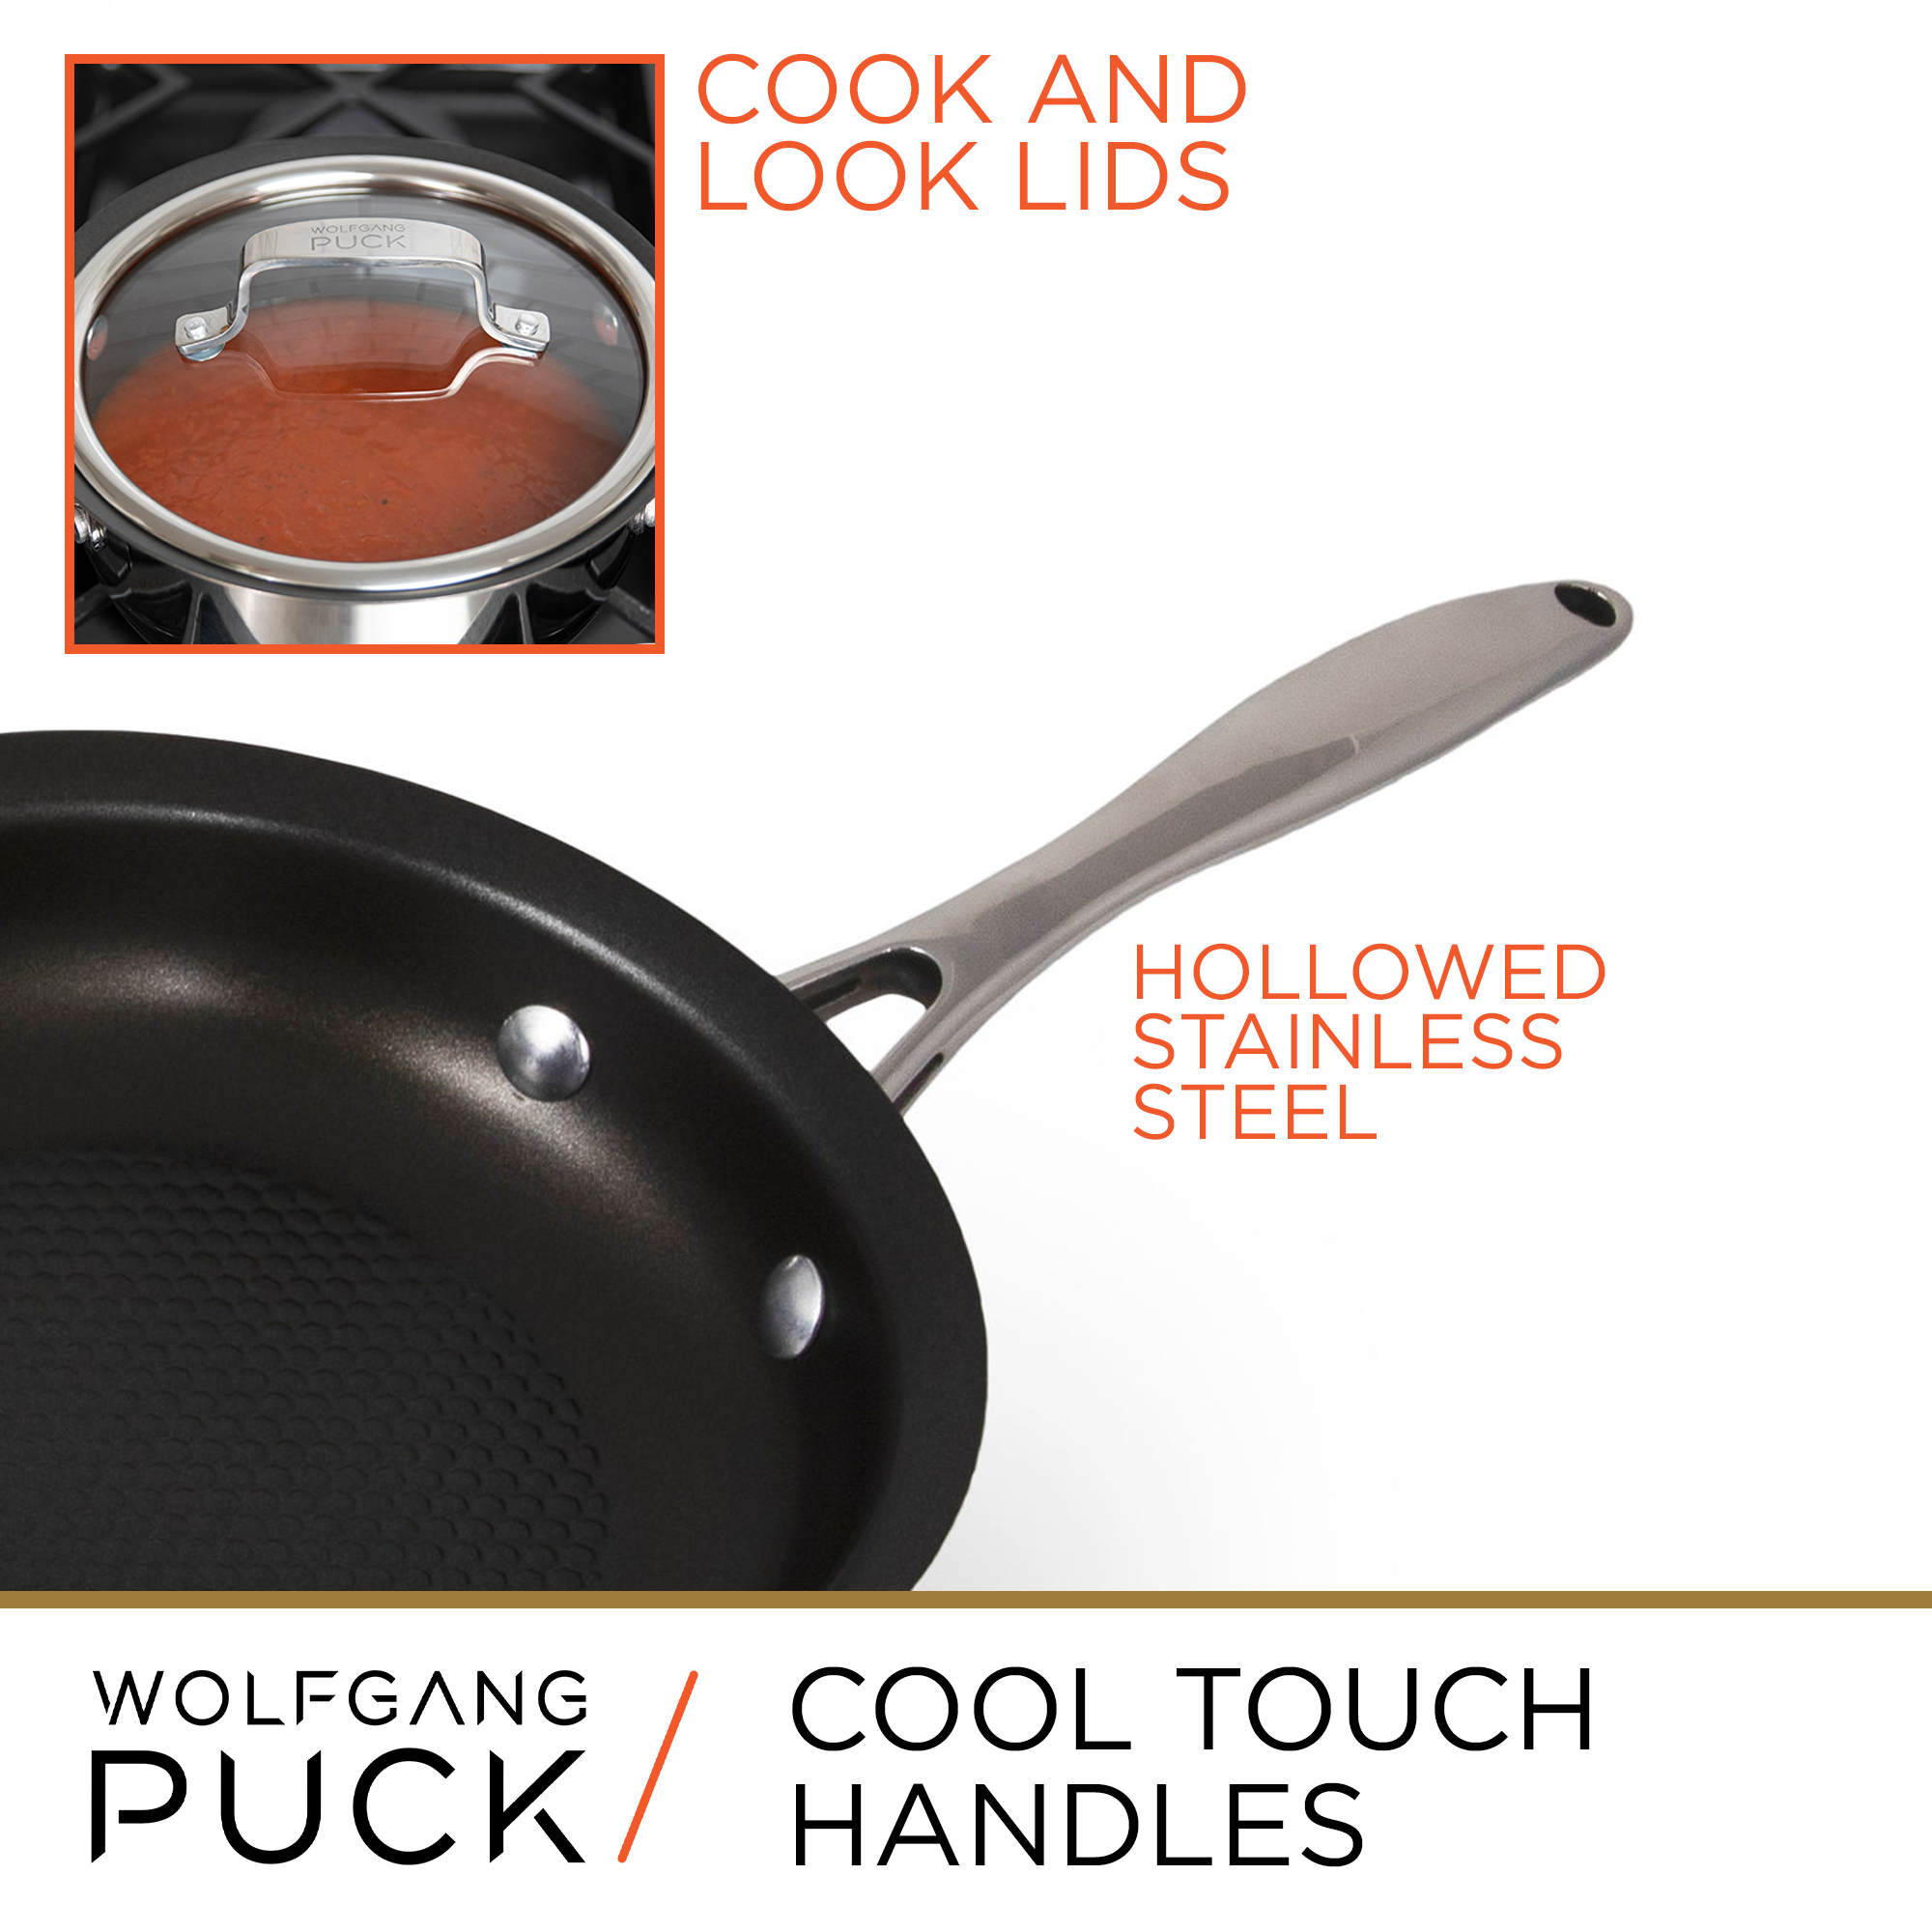 Wolfgang Puck 15-Piece Kitchen Essentials Set, Stainless Steel Skillets and Mixing Bowls, Nonstick Cookware Coating, Silicone Base Bowls